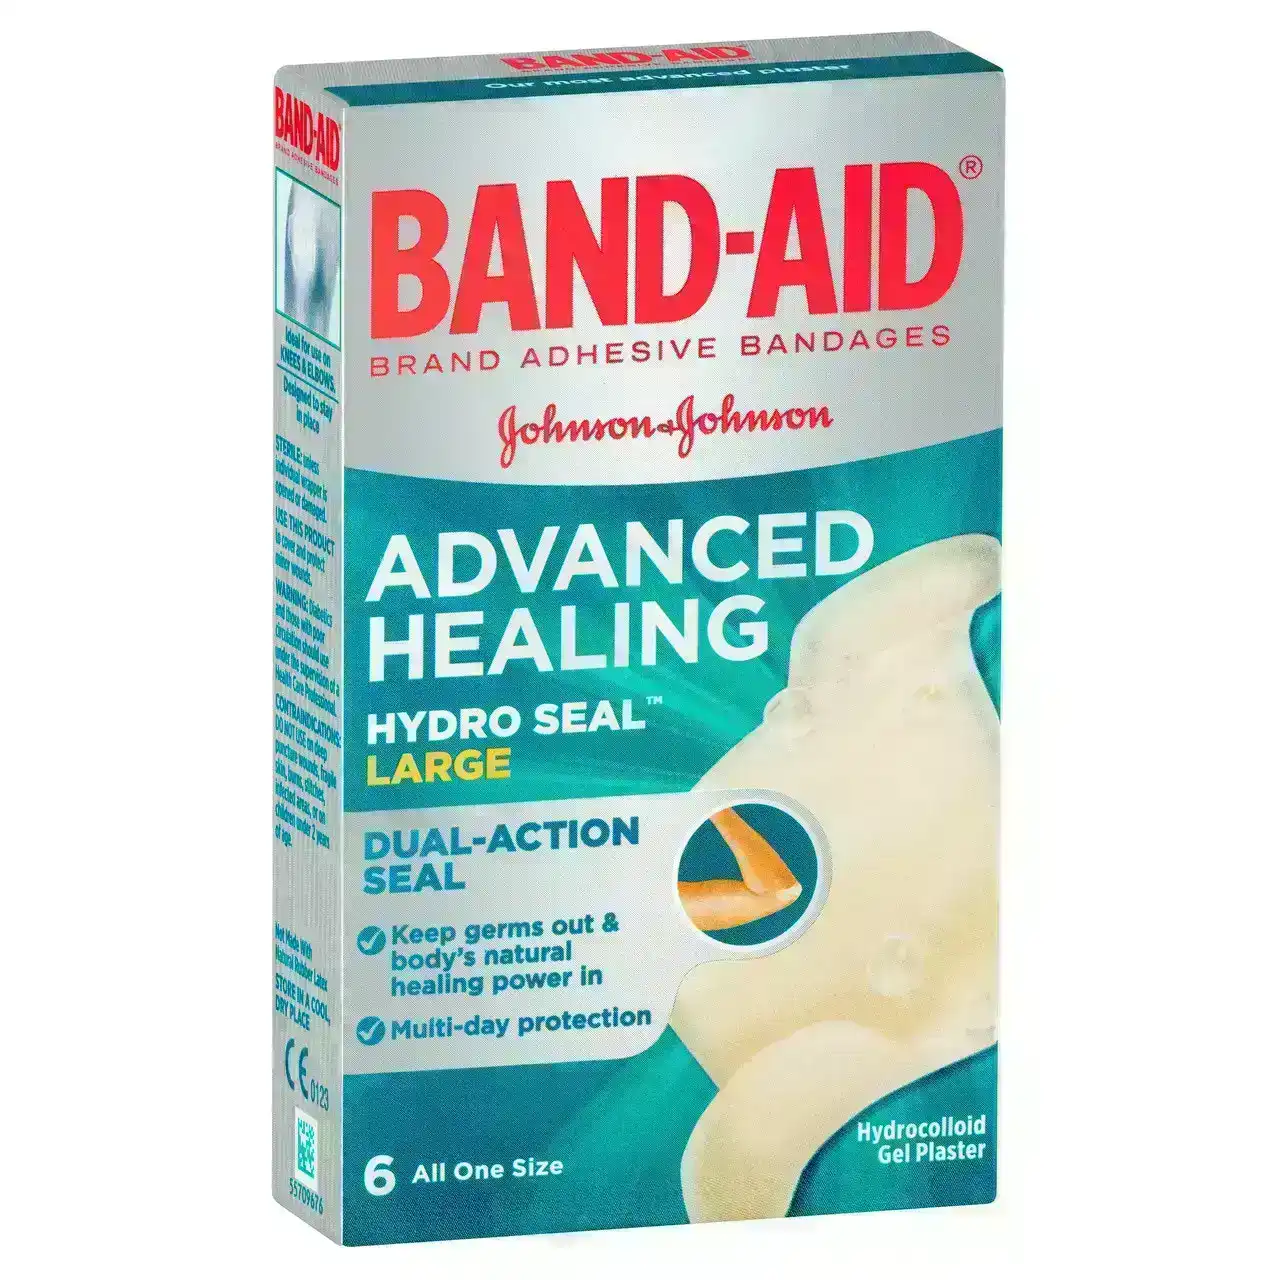 BAND-AID Advanced Healing Hydro Seal  Large Gel Plasters 6 Pack